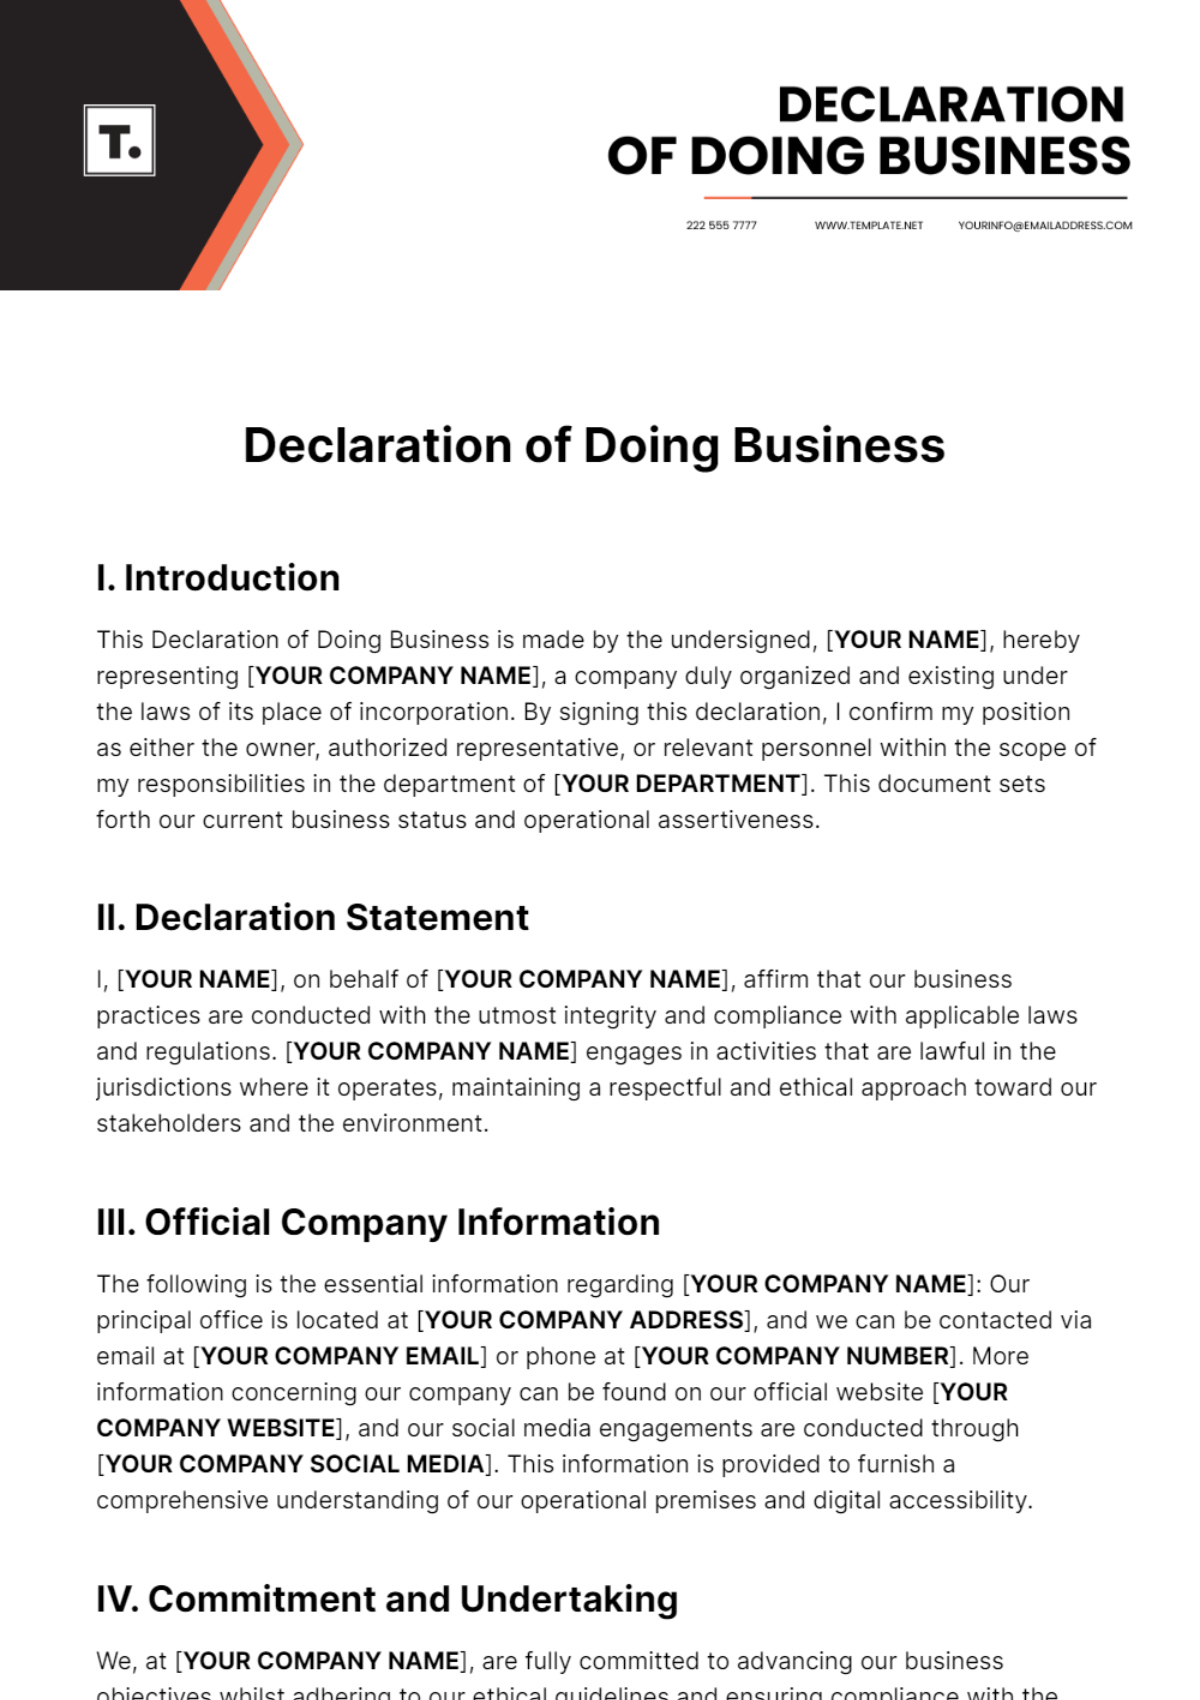 Free Declaration of Doing Business Template